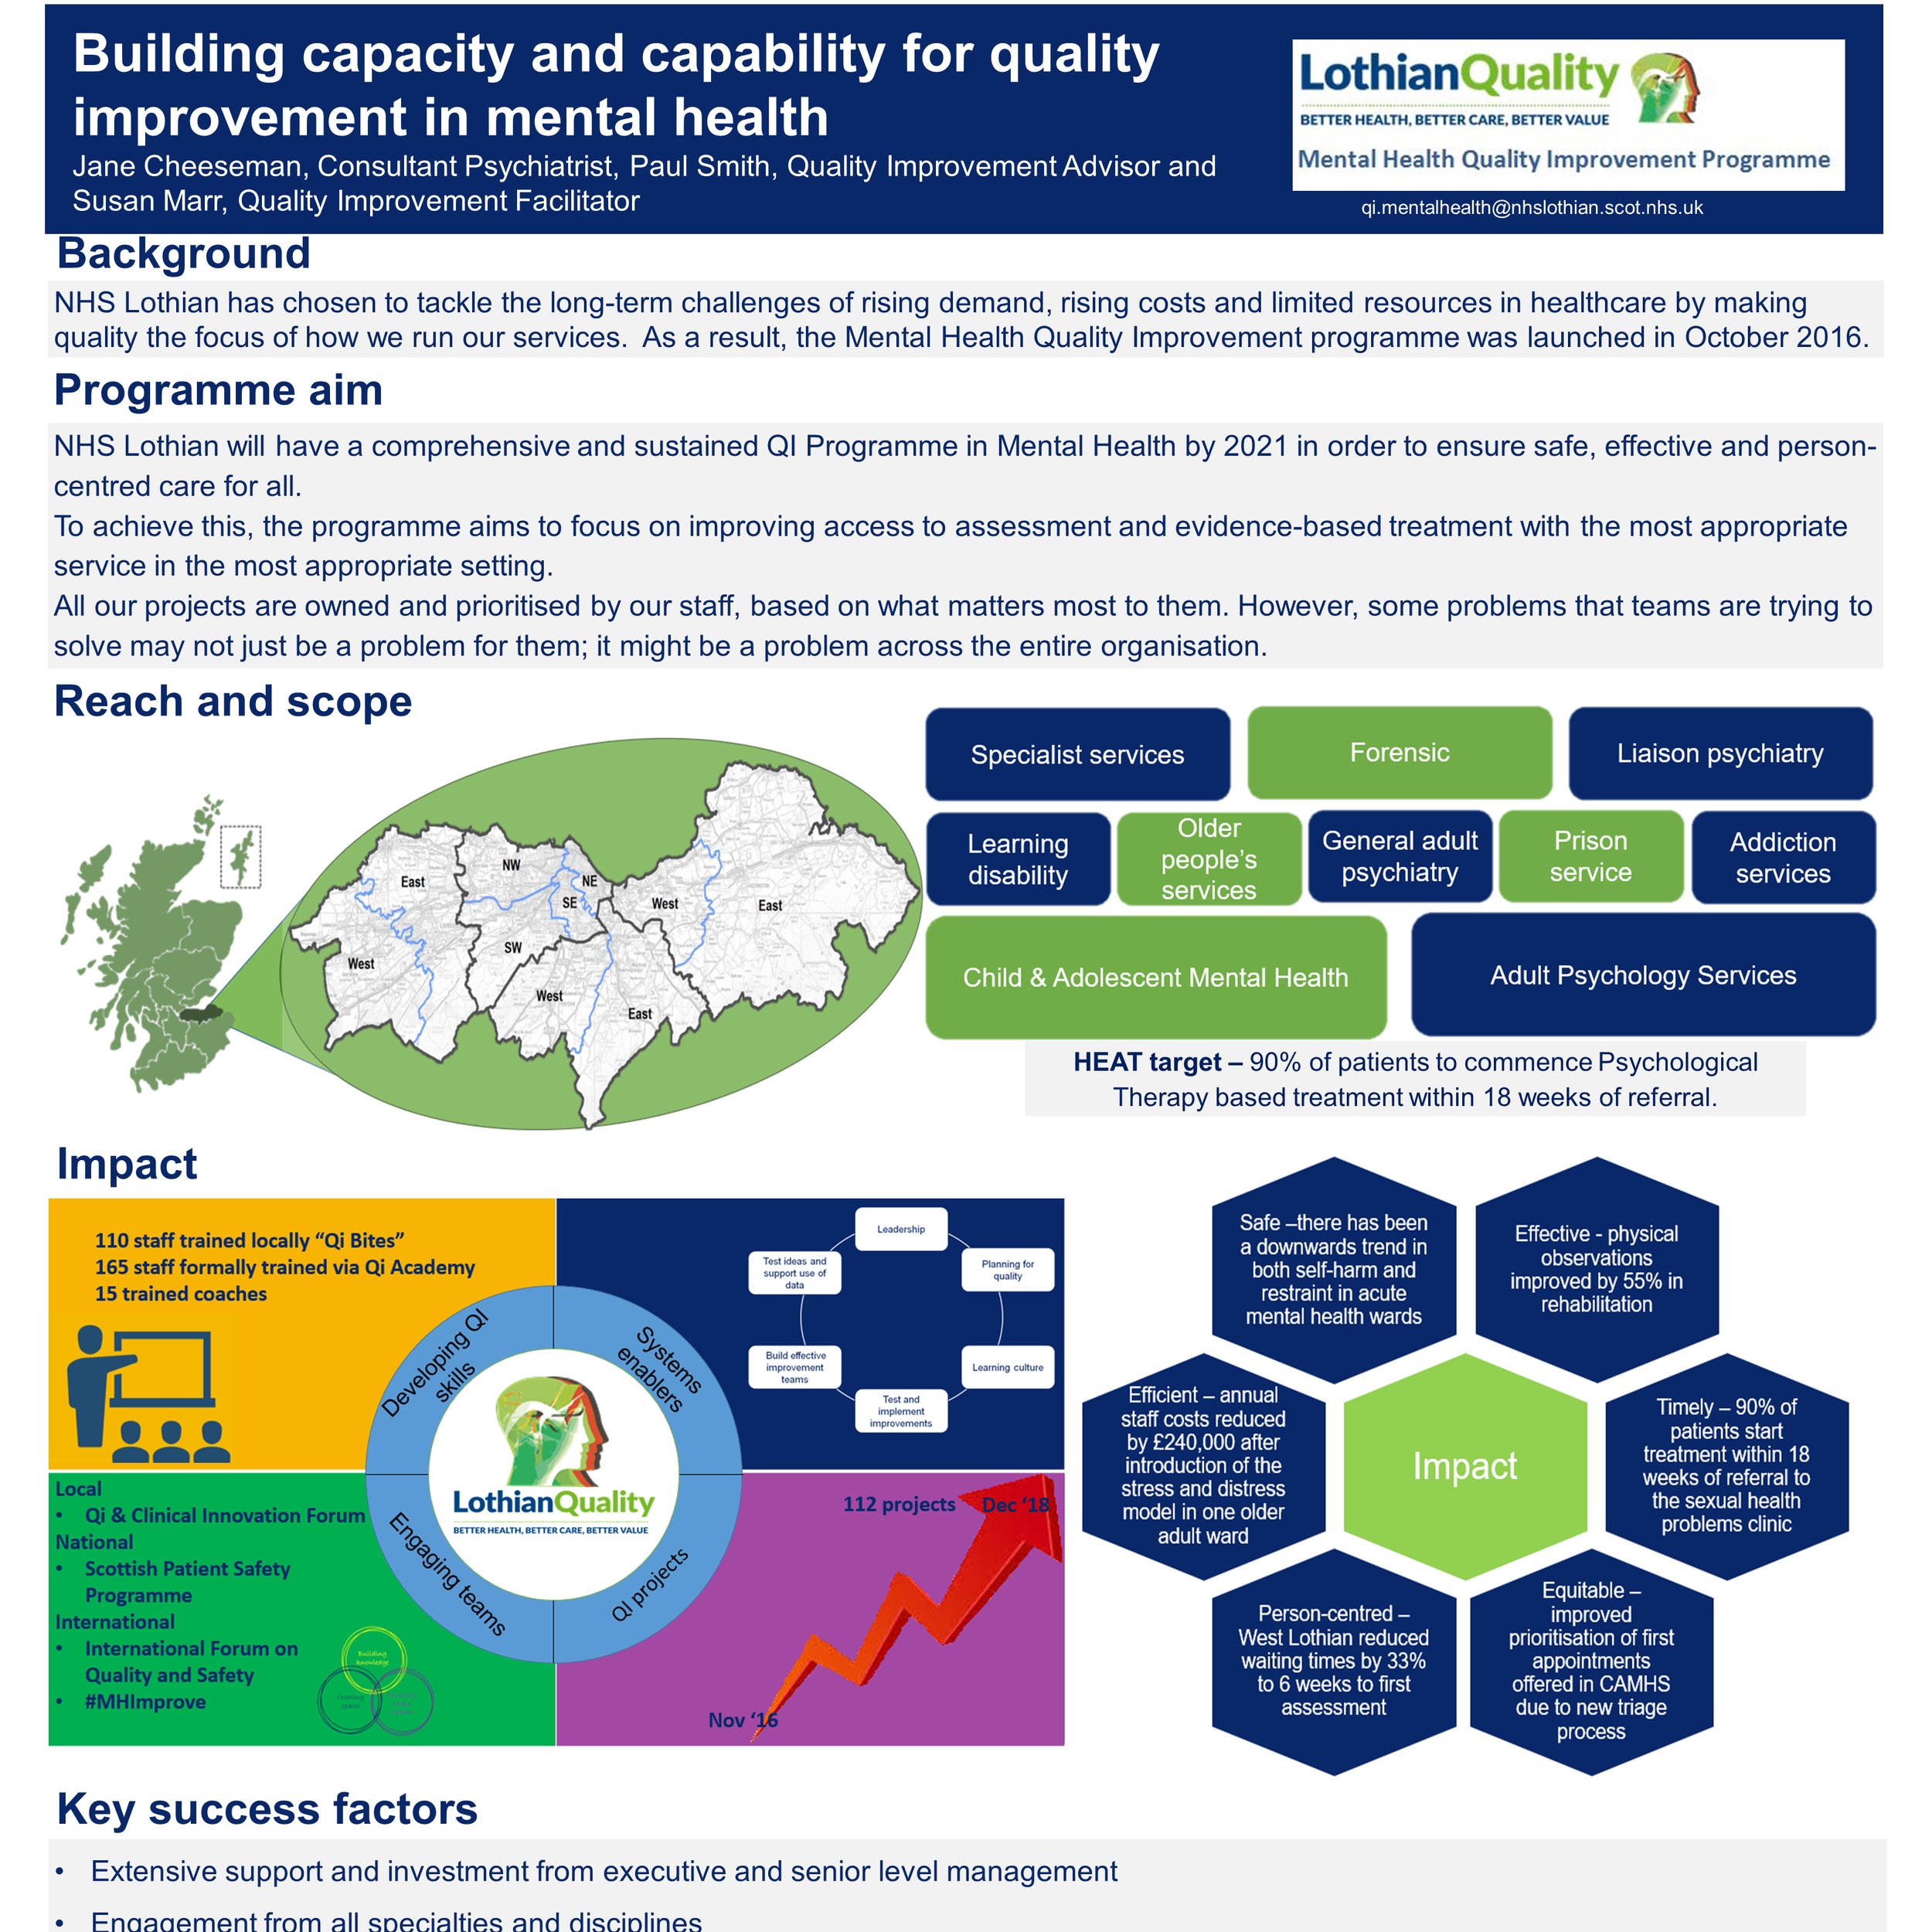 Building capacity and capability for quality Improvement in mental health